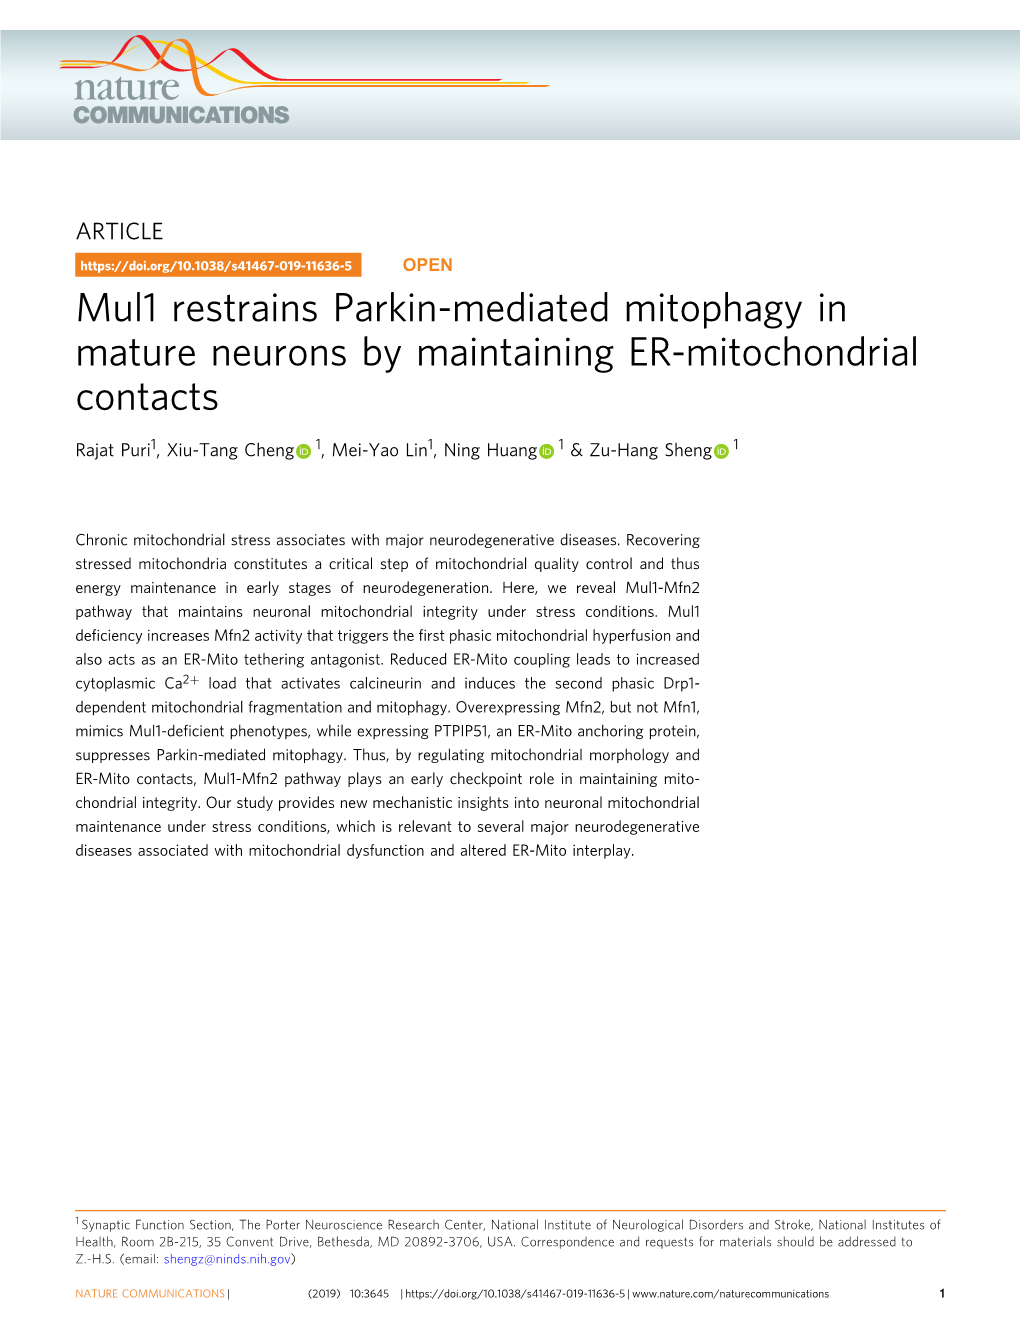 Mul1 Restrains Parkin-Mediated Mitophagy in Mature Neurons by Maintaining ER-Mitochondrial Contacts